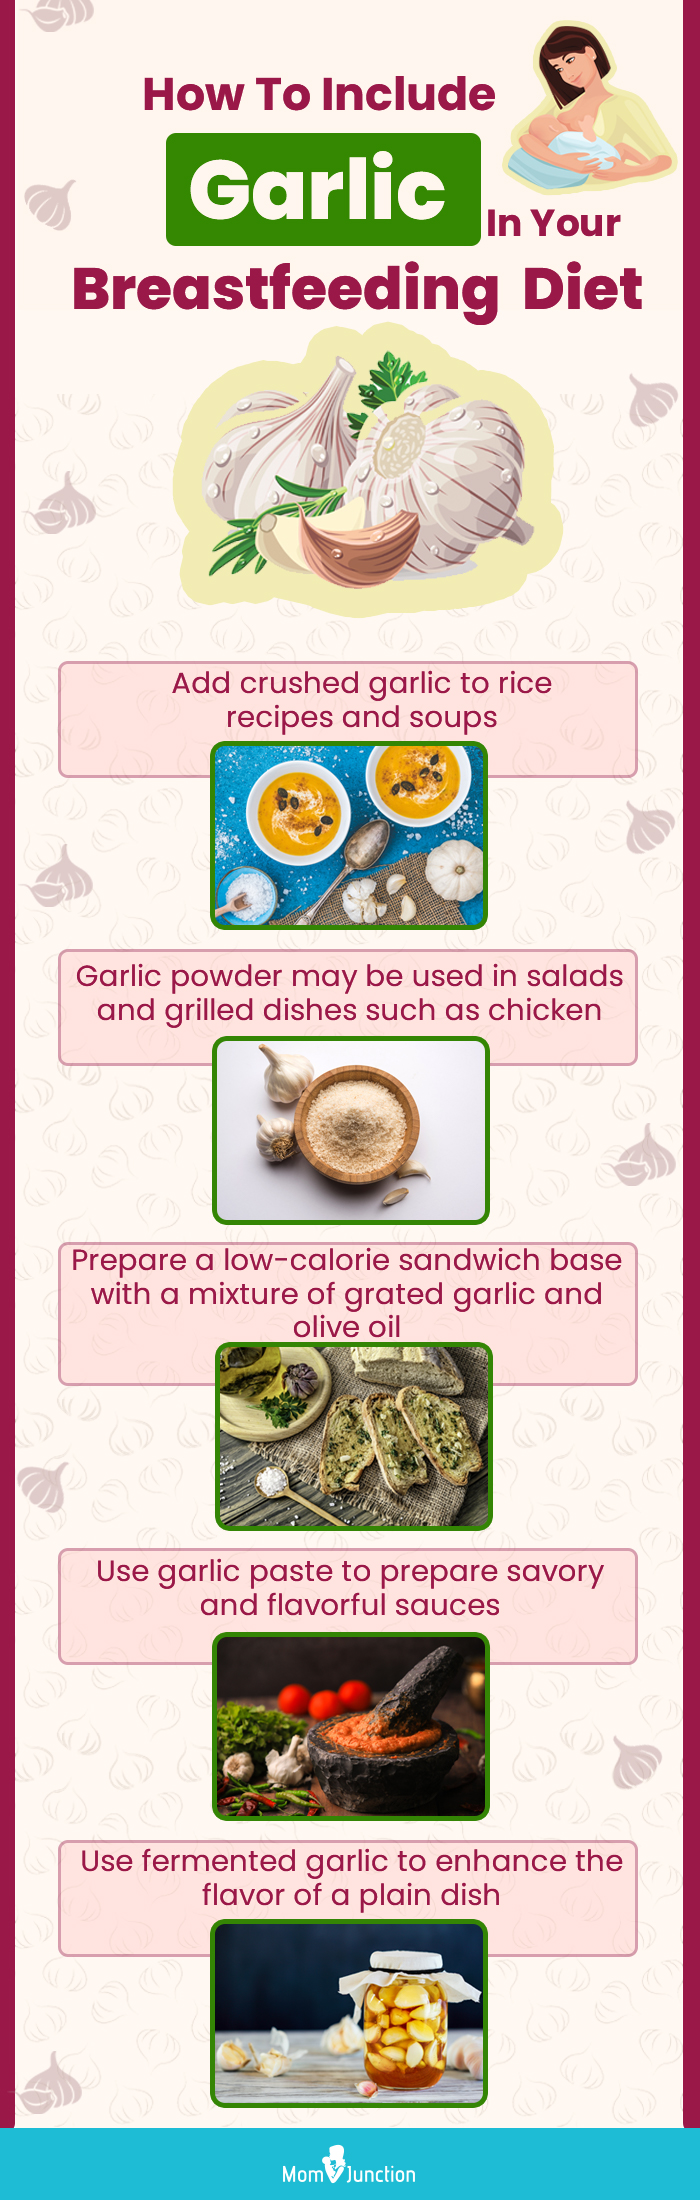 how to include garlic in your breastfeeding diet (infographic)